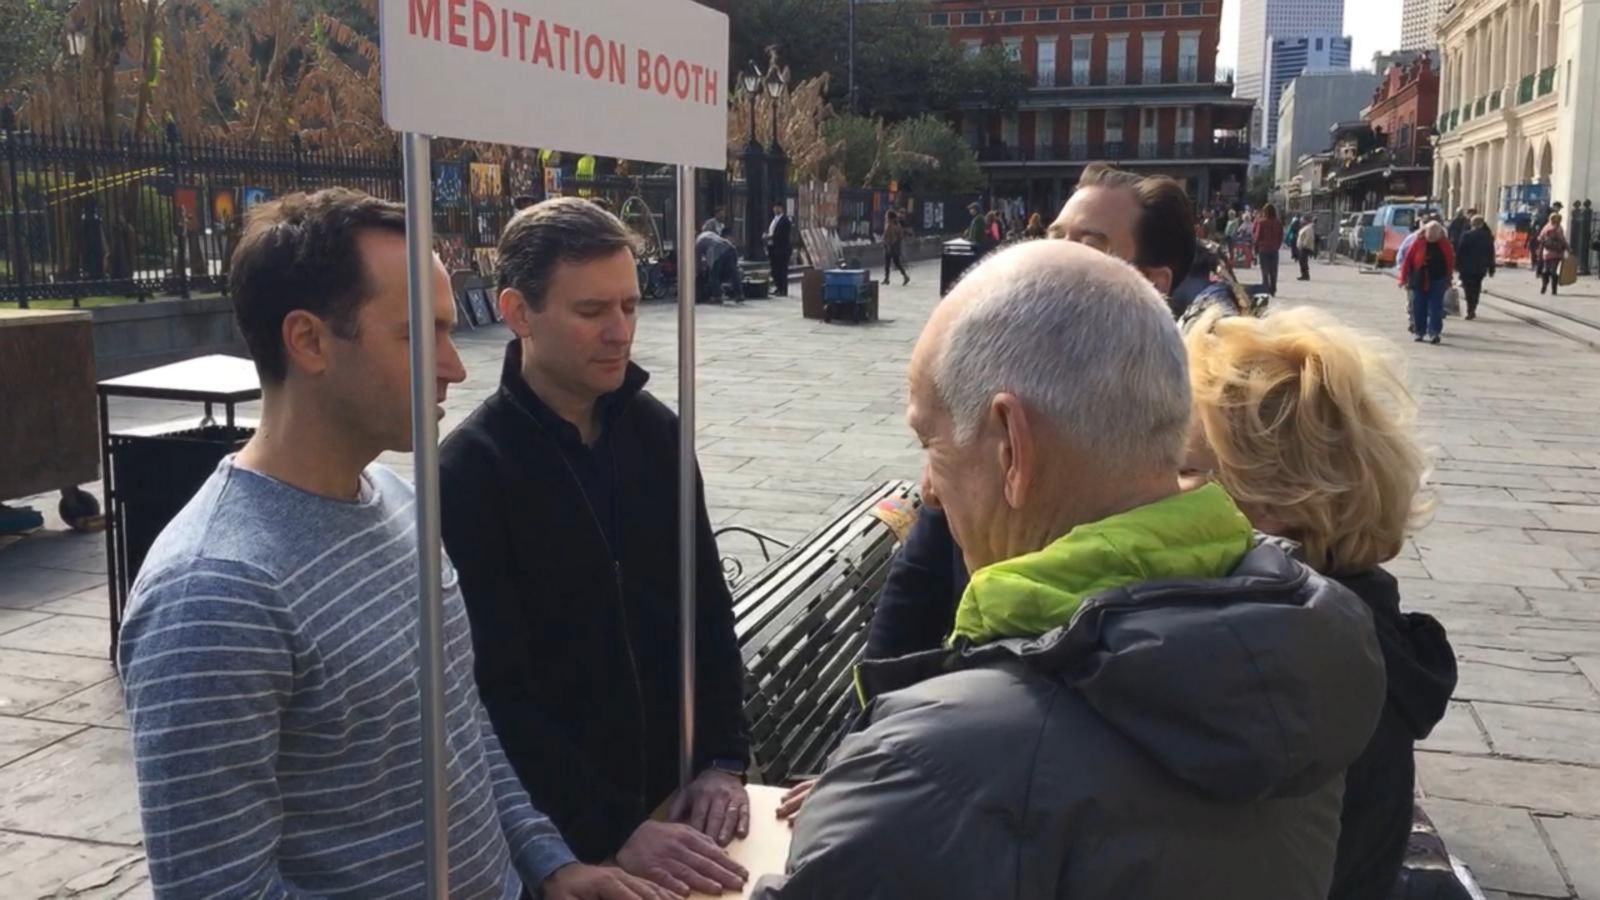 10% Happier Road Trip: Teaching Tourists How to Meditate in New Orleans